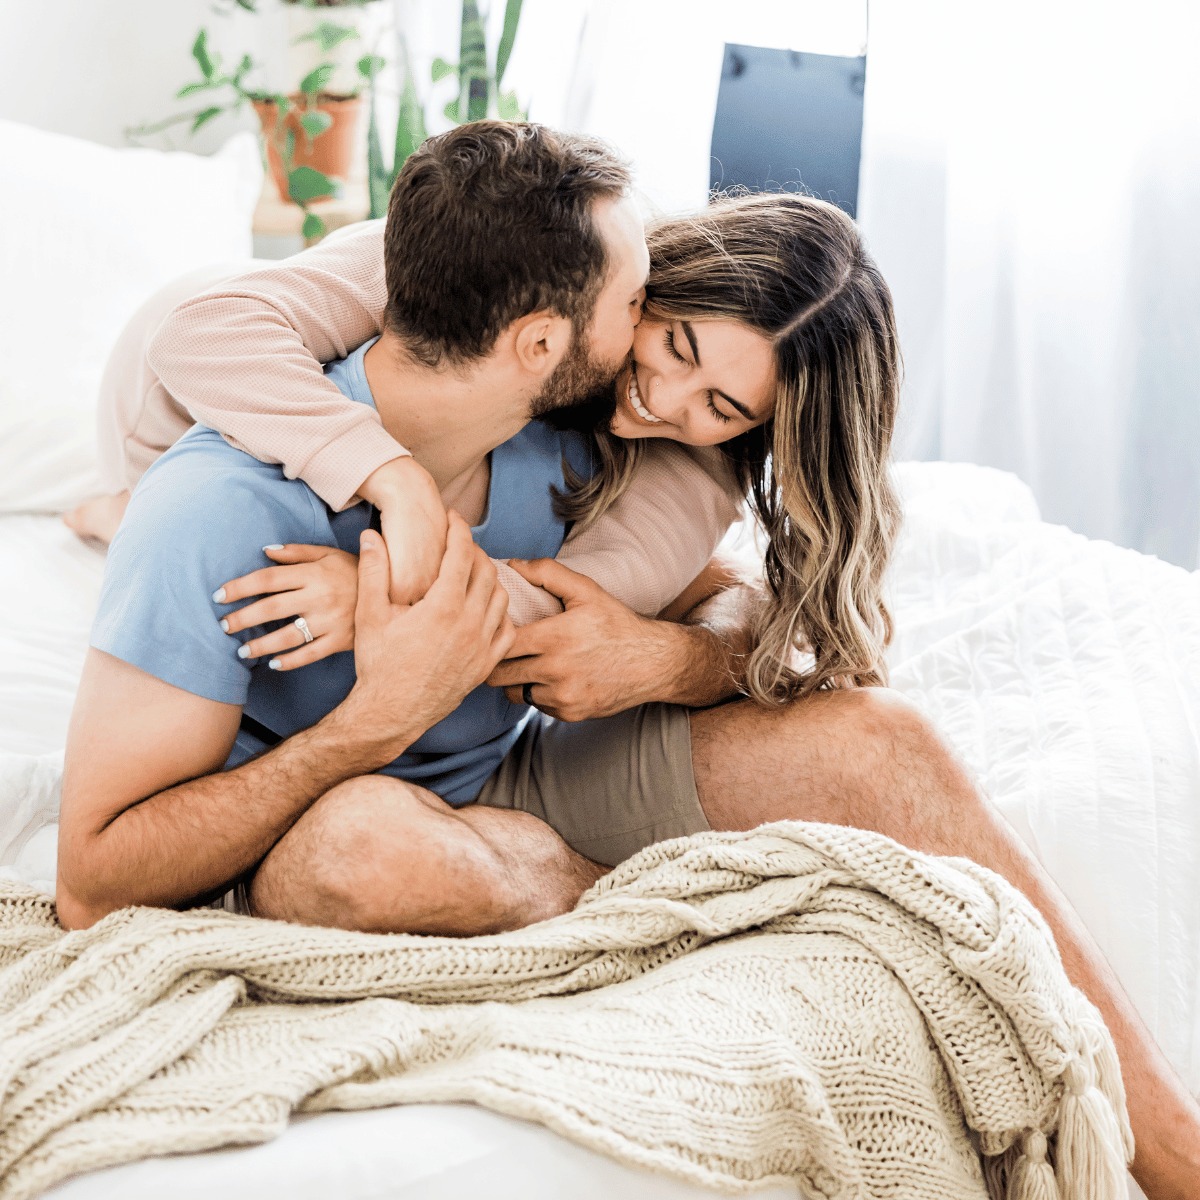 Couple cuddling in bed showing physical intimacy - Featured In: Situationship Vs Friends With Benefits